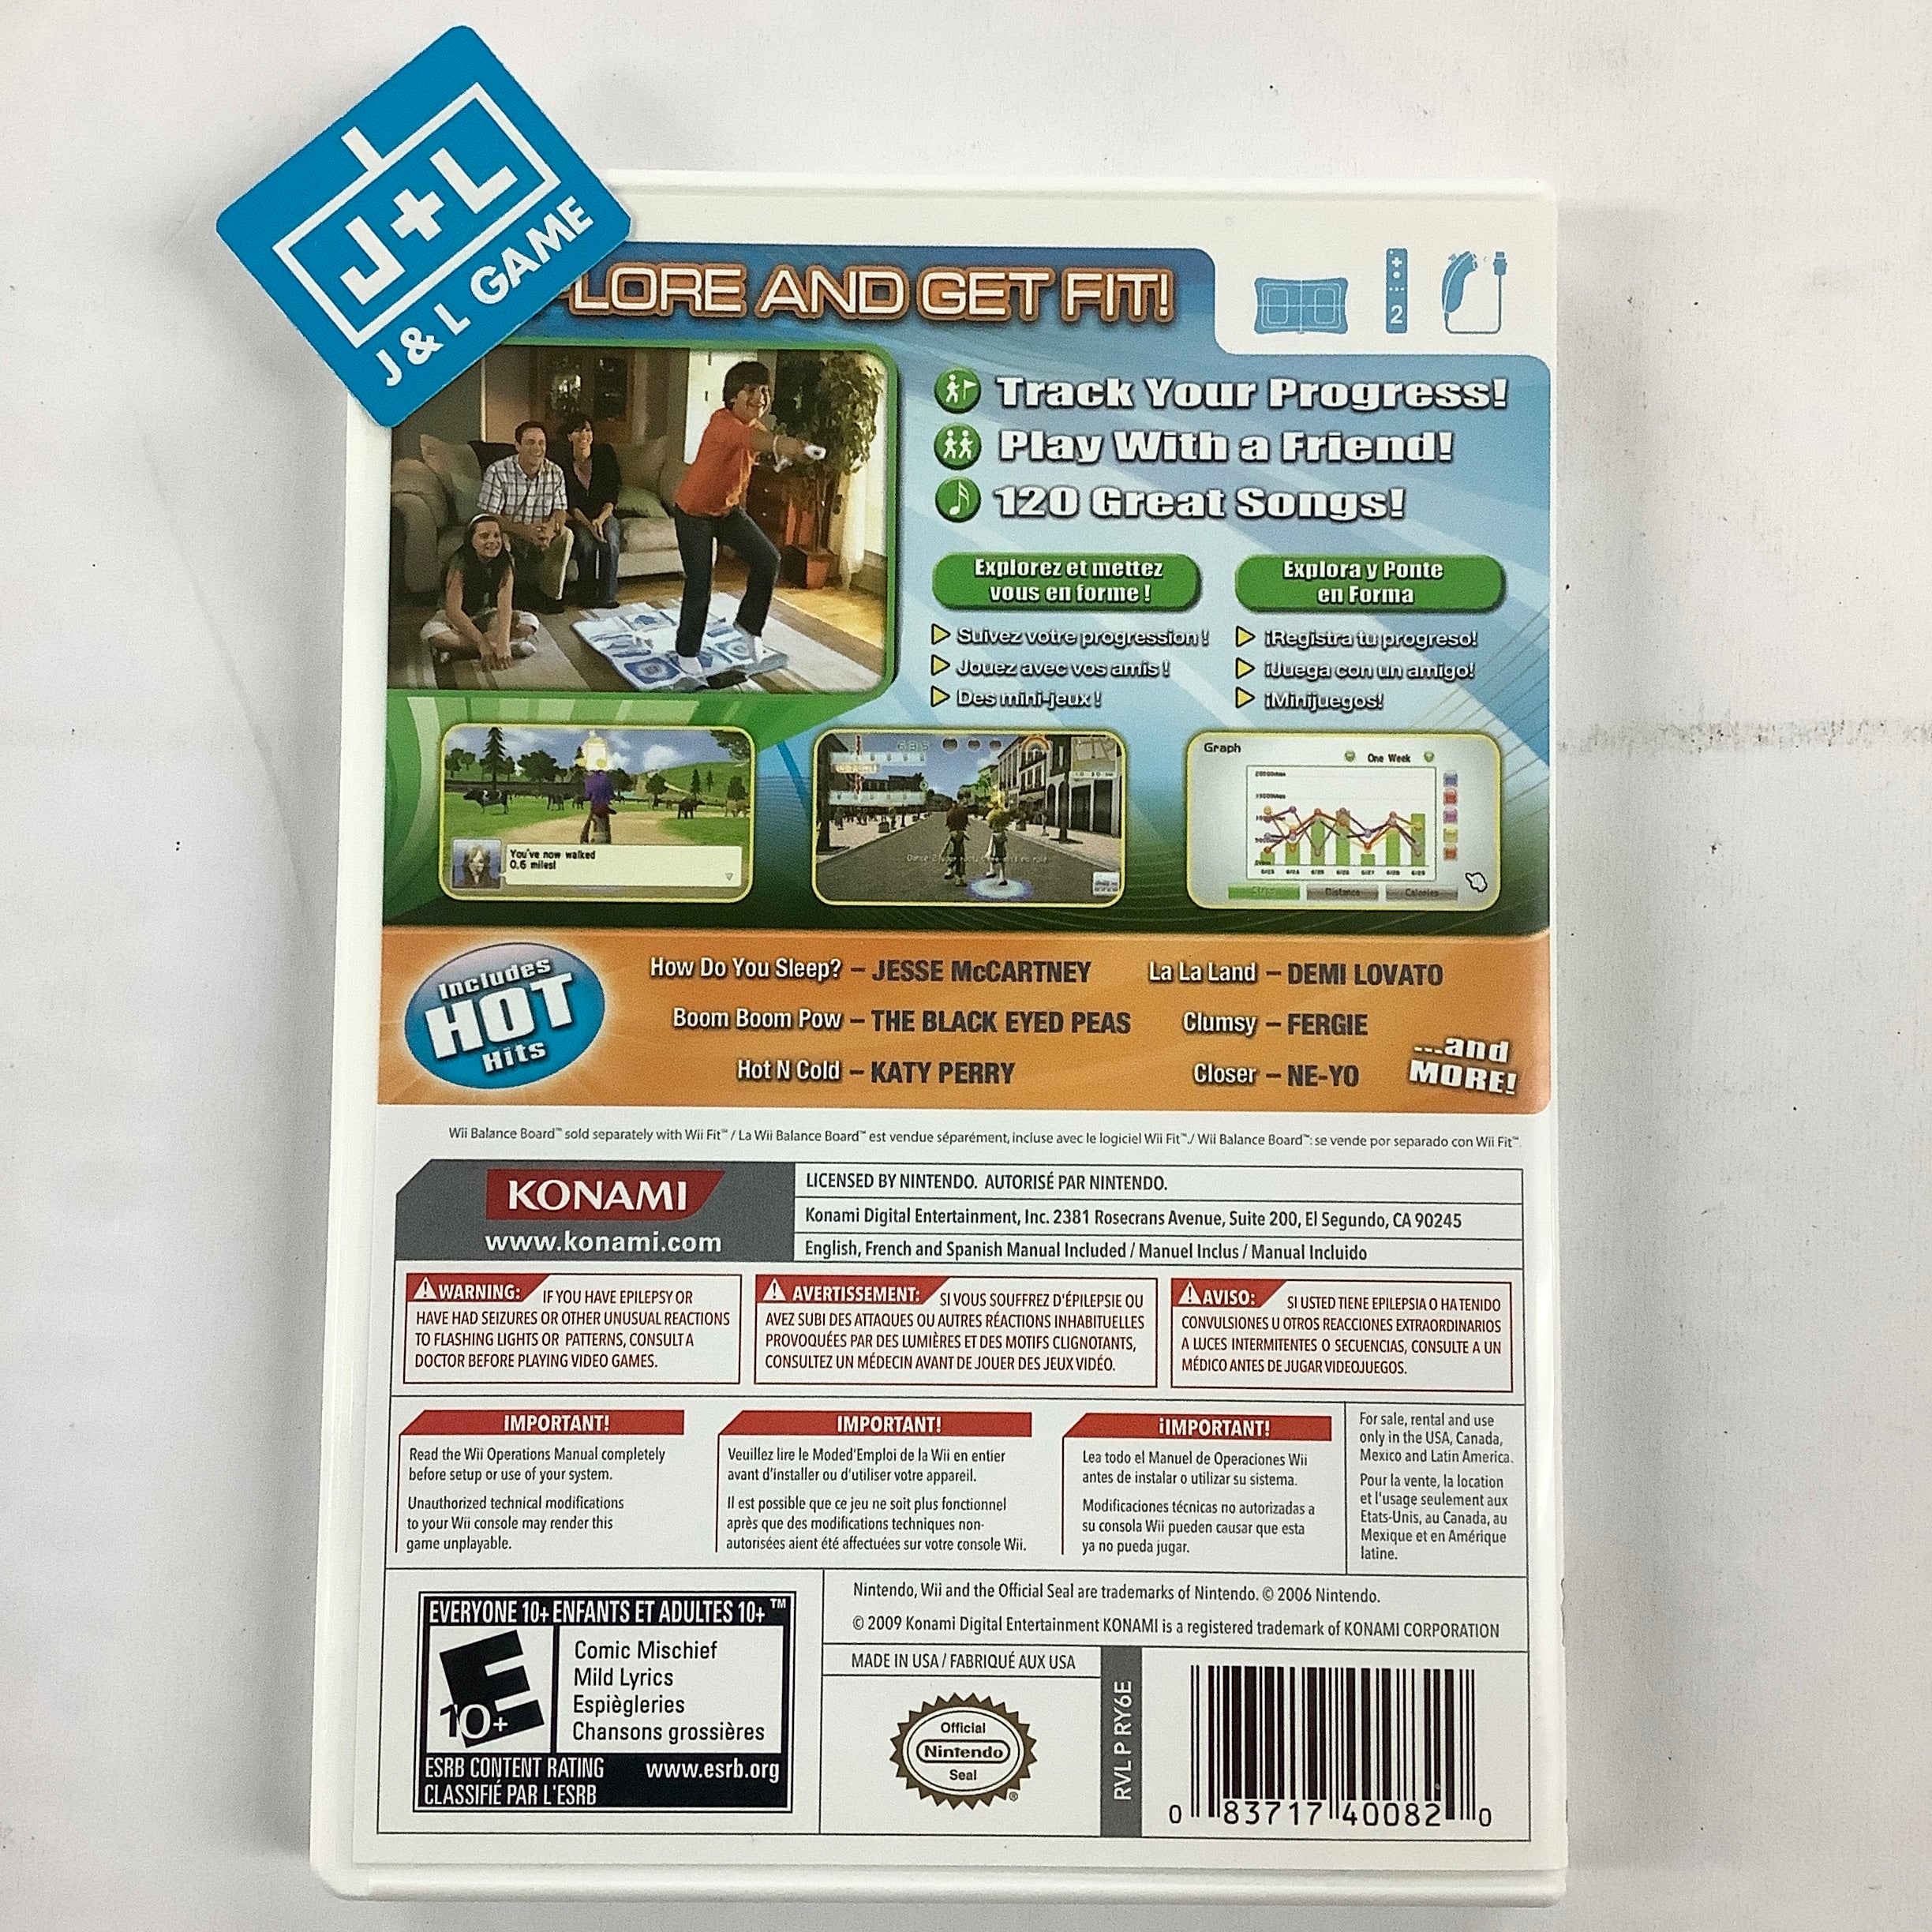 Walk It Out! - Nintendo Wii [Pre-Owned] Video Games Konami   